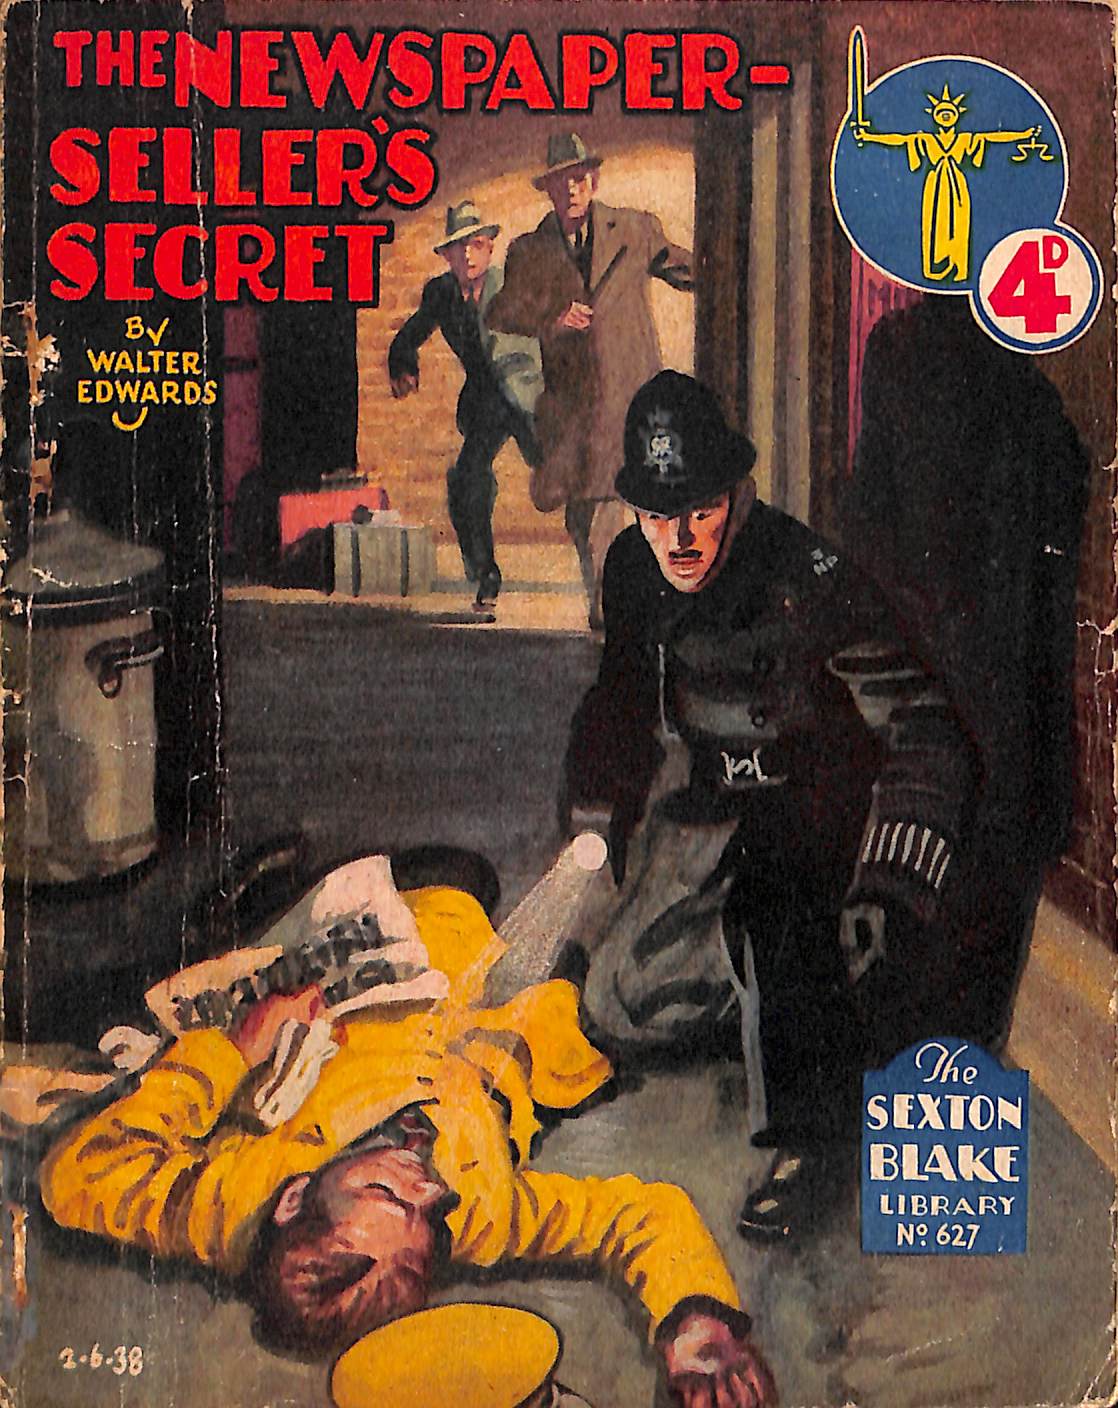 Book Cover For Sexton Blake Library S2 627 - The Newspaper Seller's Secret